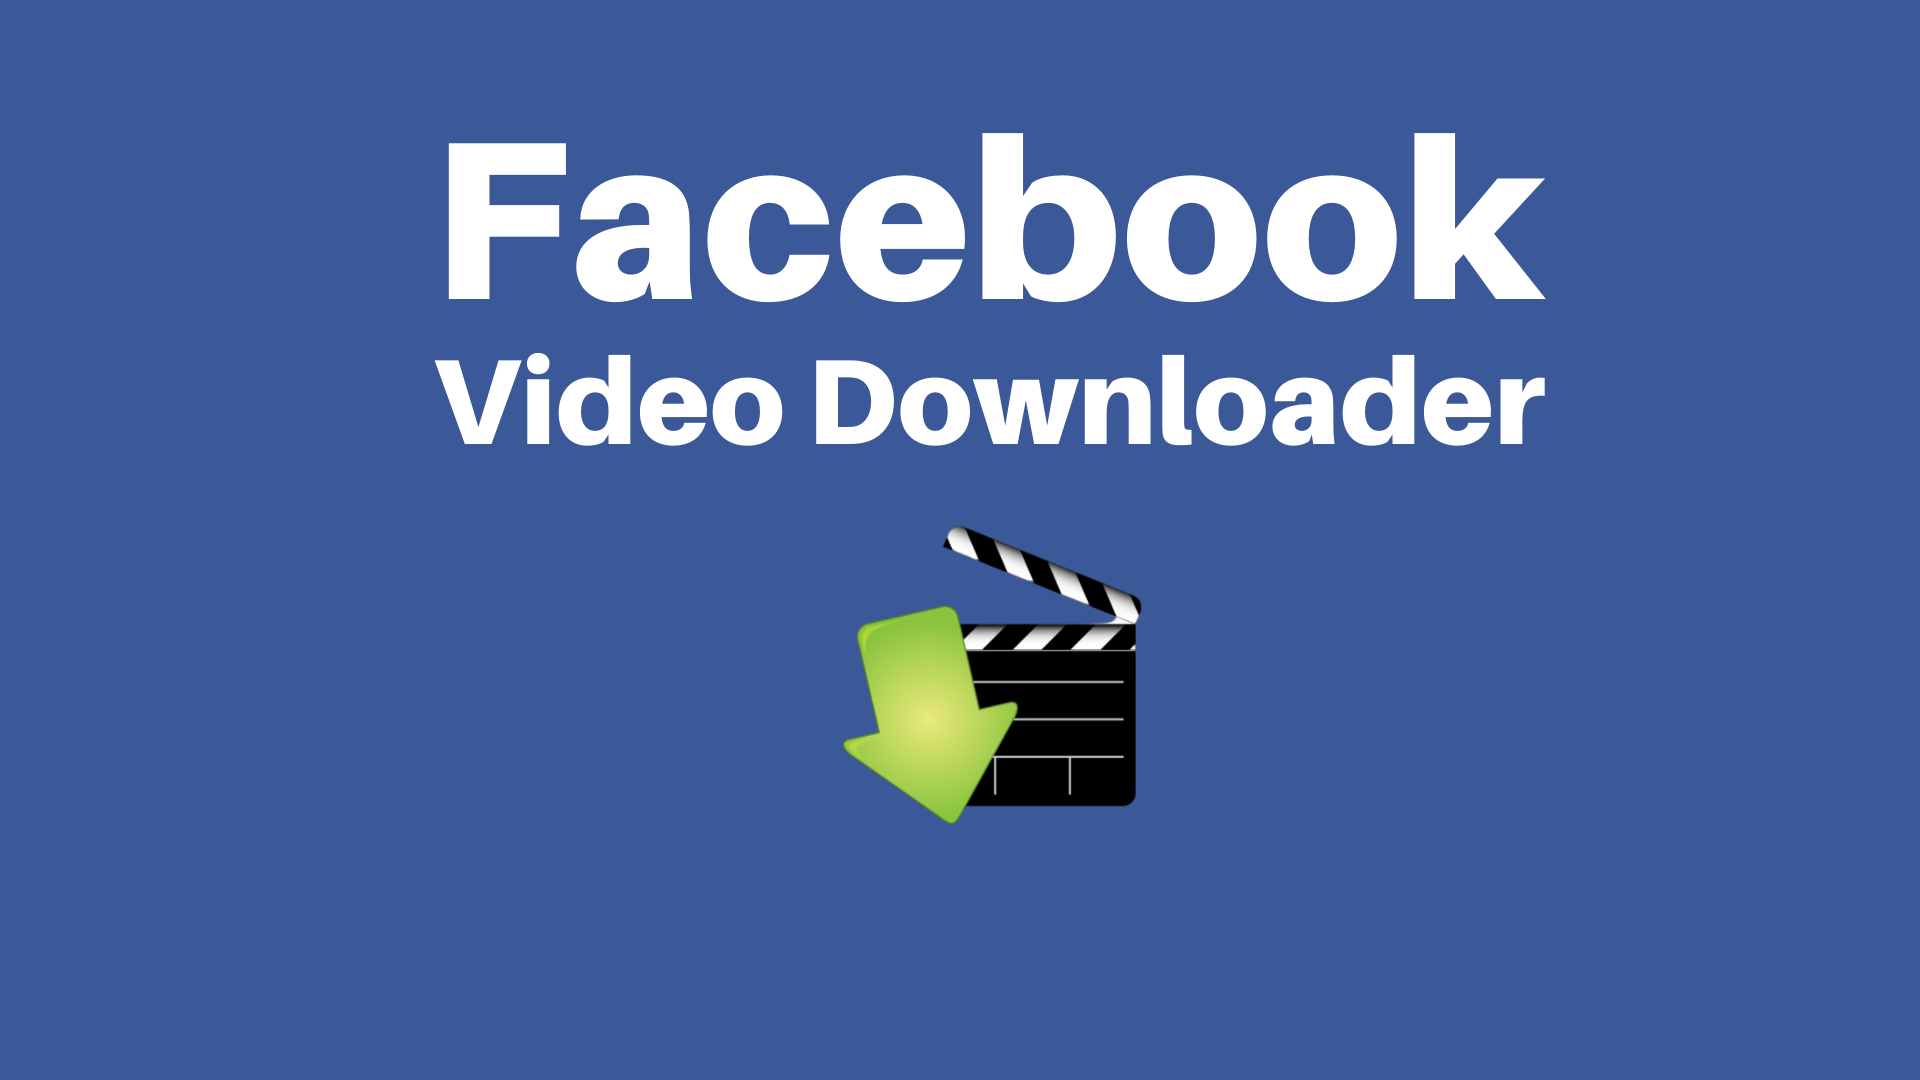 How to save Facebook videos to computer? Number 1 online tool